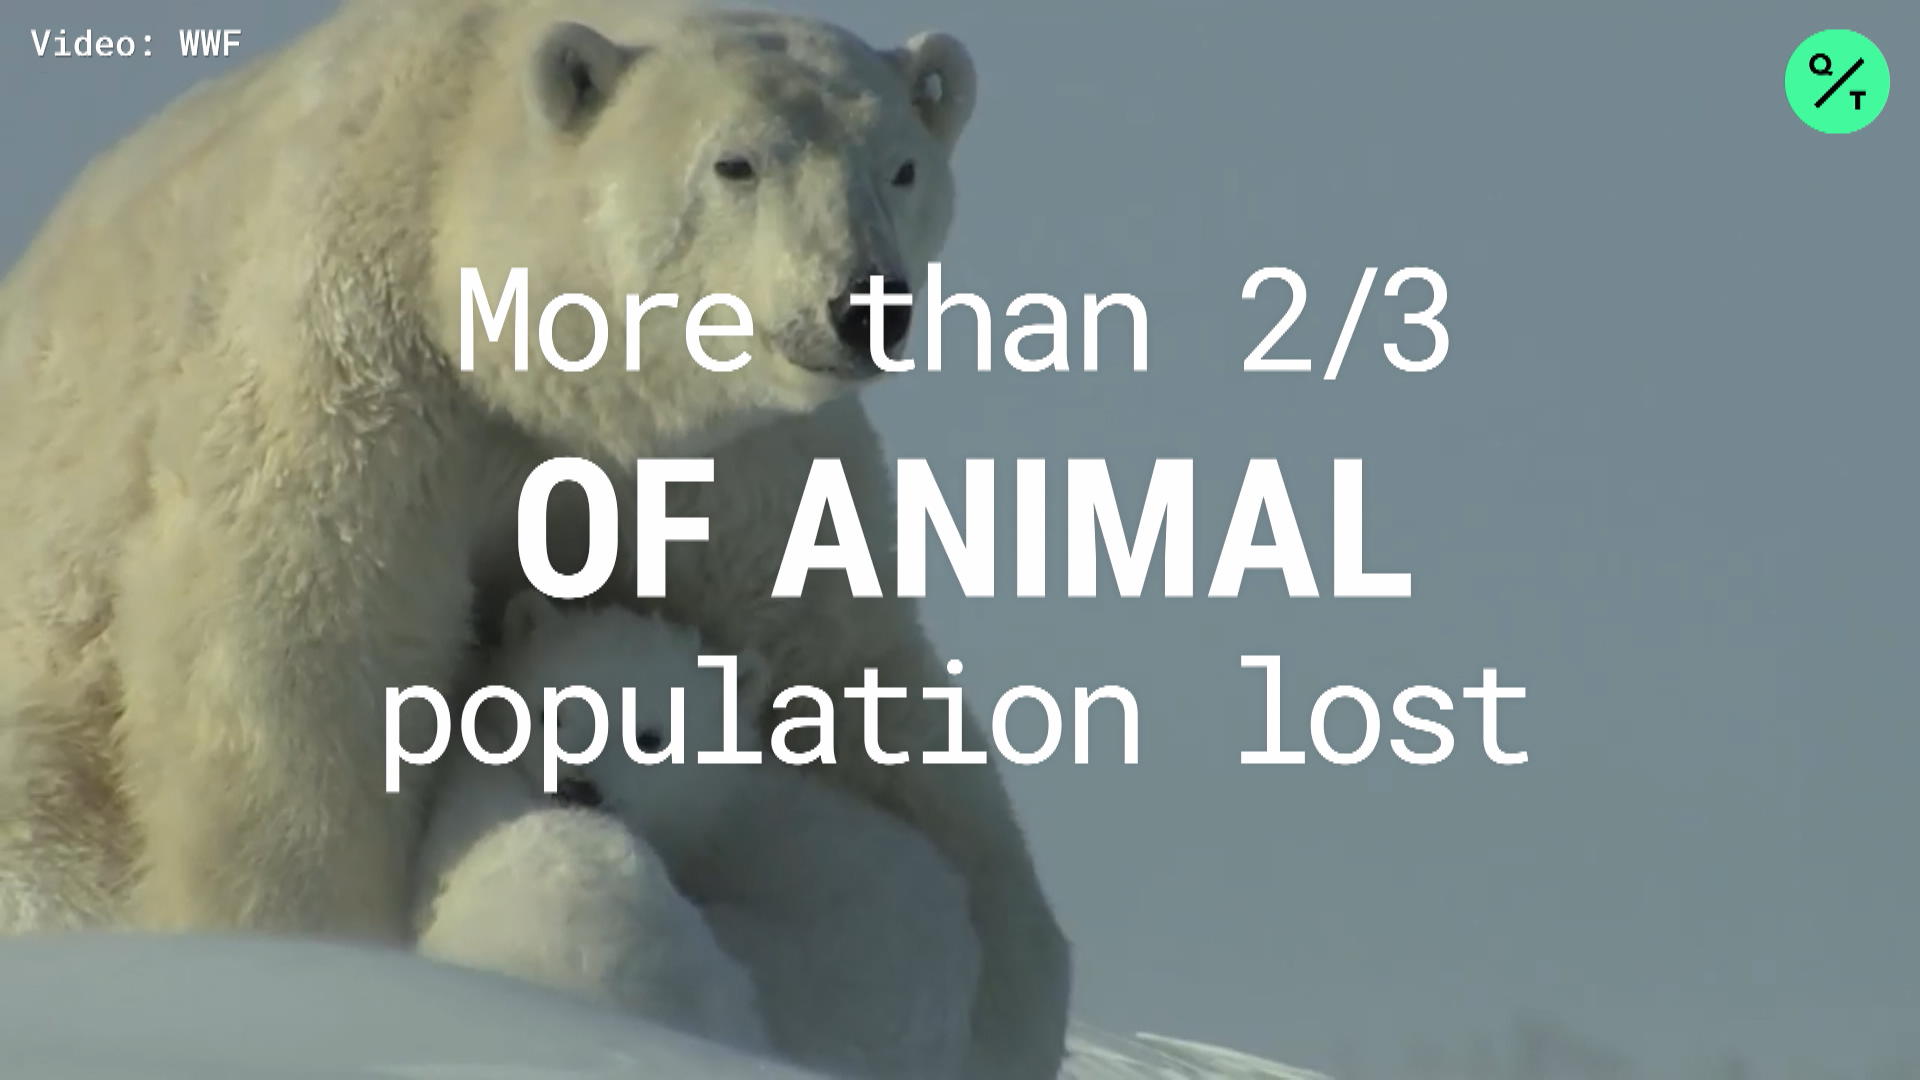 Watch Animal Population Shrunk 68% in 50 Years - Bloomberg